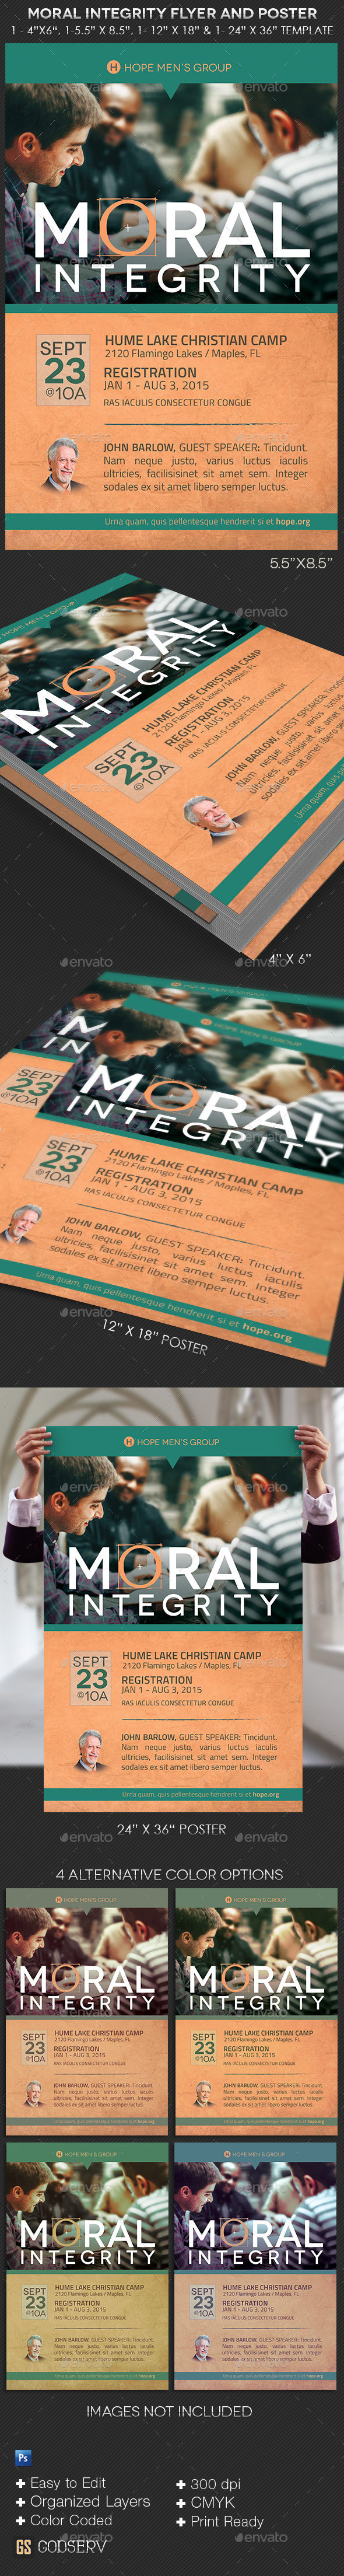 Moral integrity flyer and poster template preview